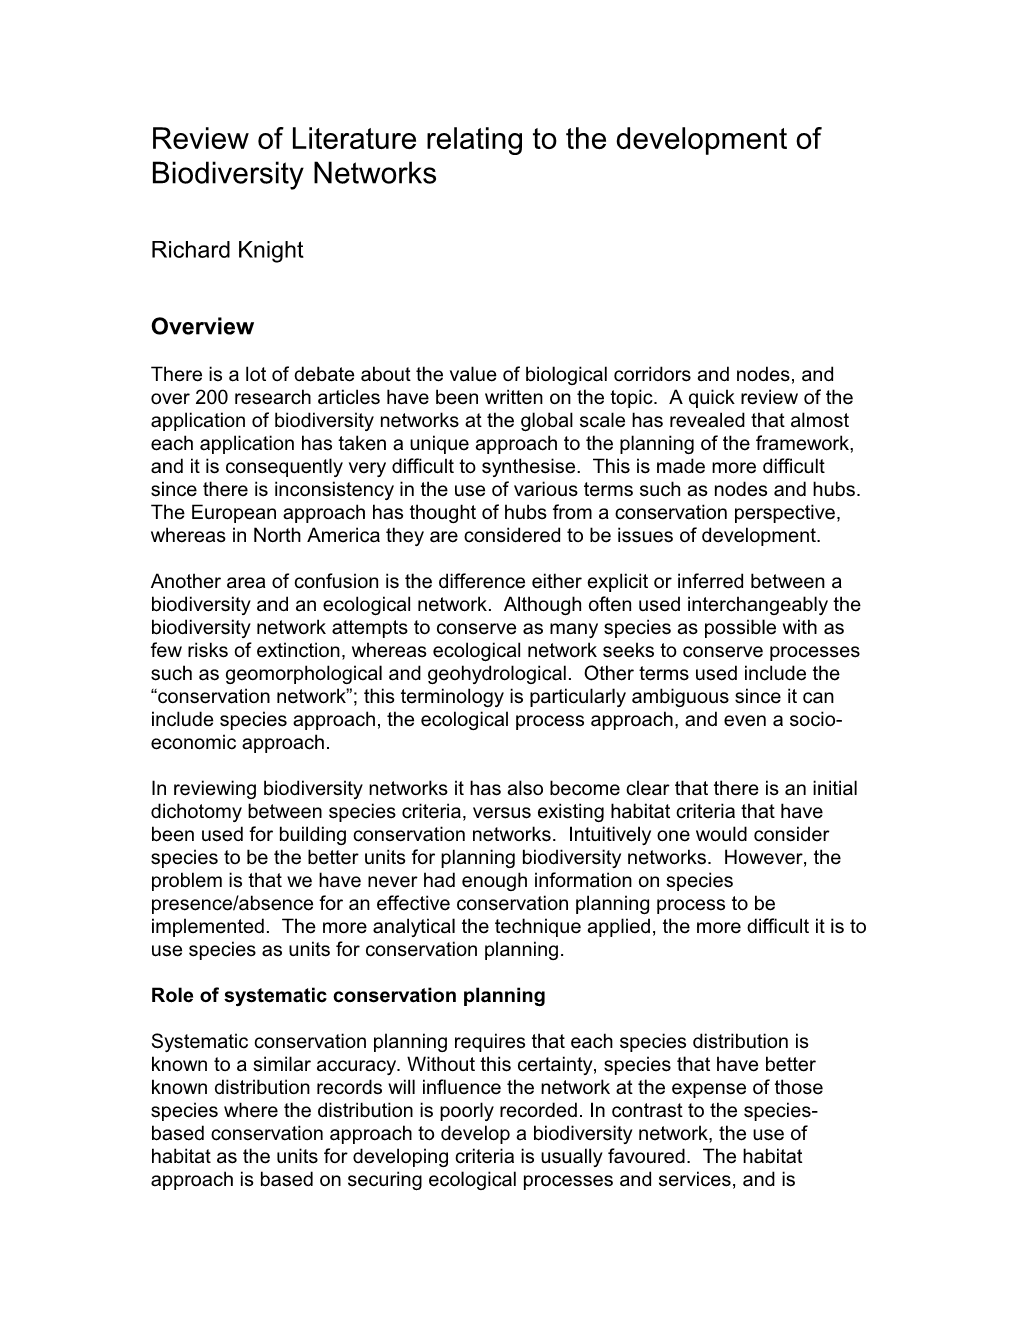 Review of Literature Relating to the Development of Biodiversity Networks